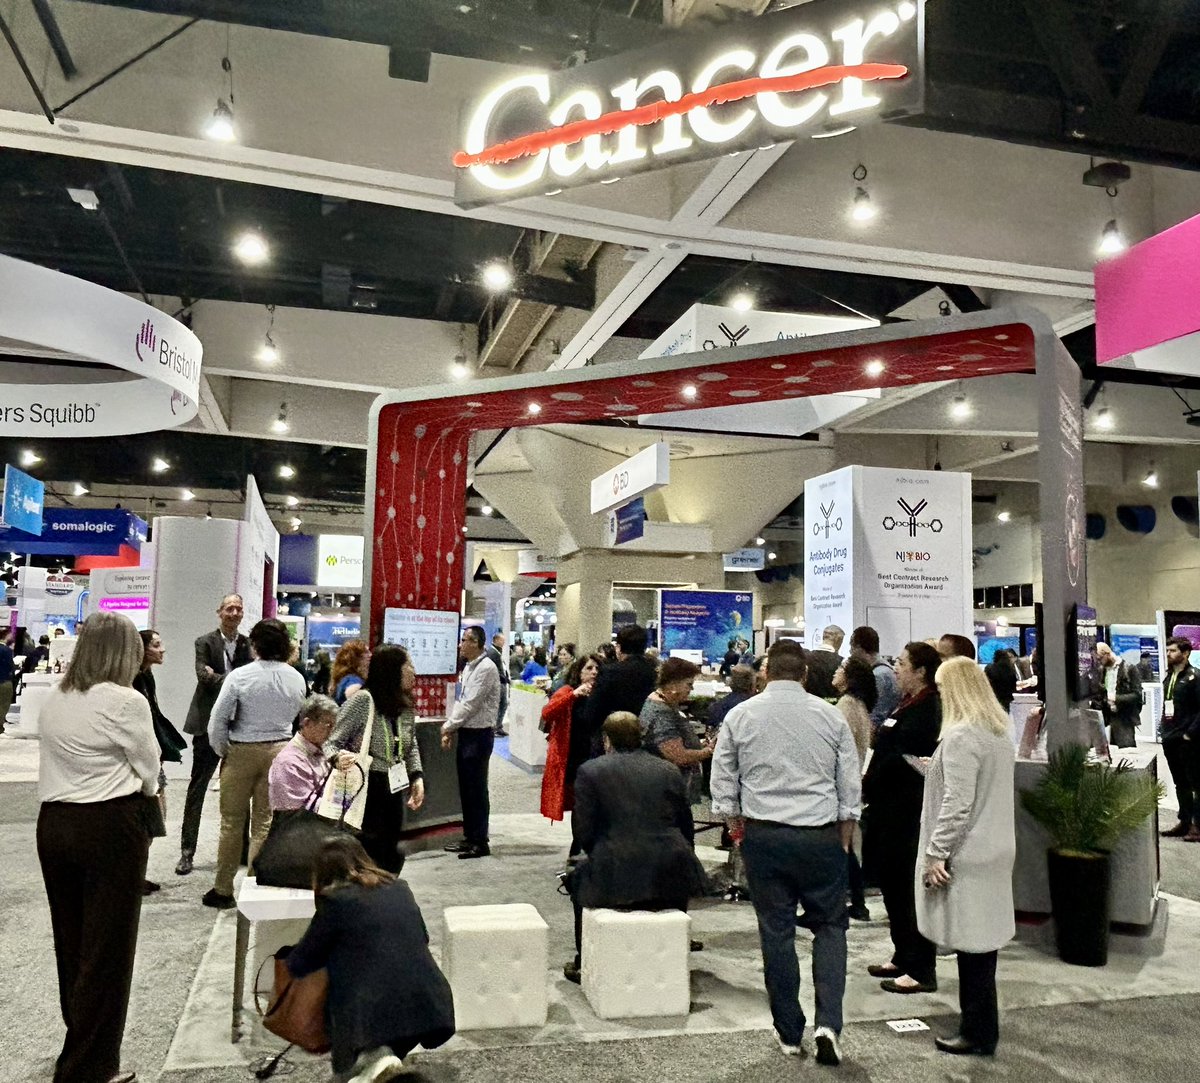 Another busy day for @MDAndersonNews at #AACR24! Stop by this afternoon to say hello to one of our many experts, including @timheff5, @DraettaG and @JenniferLitton! Find our schedule at MDAnderson.org/AACR. #EndCancer